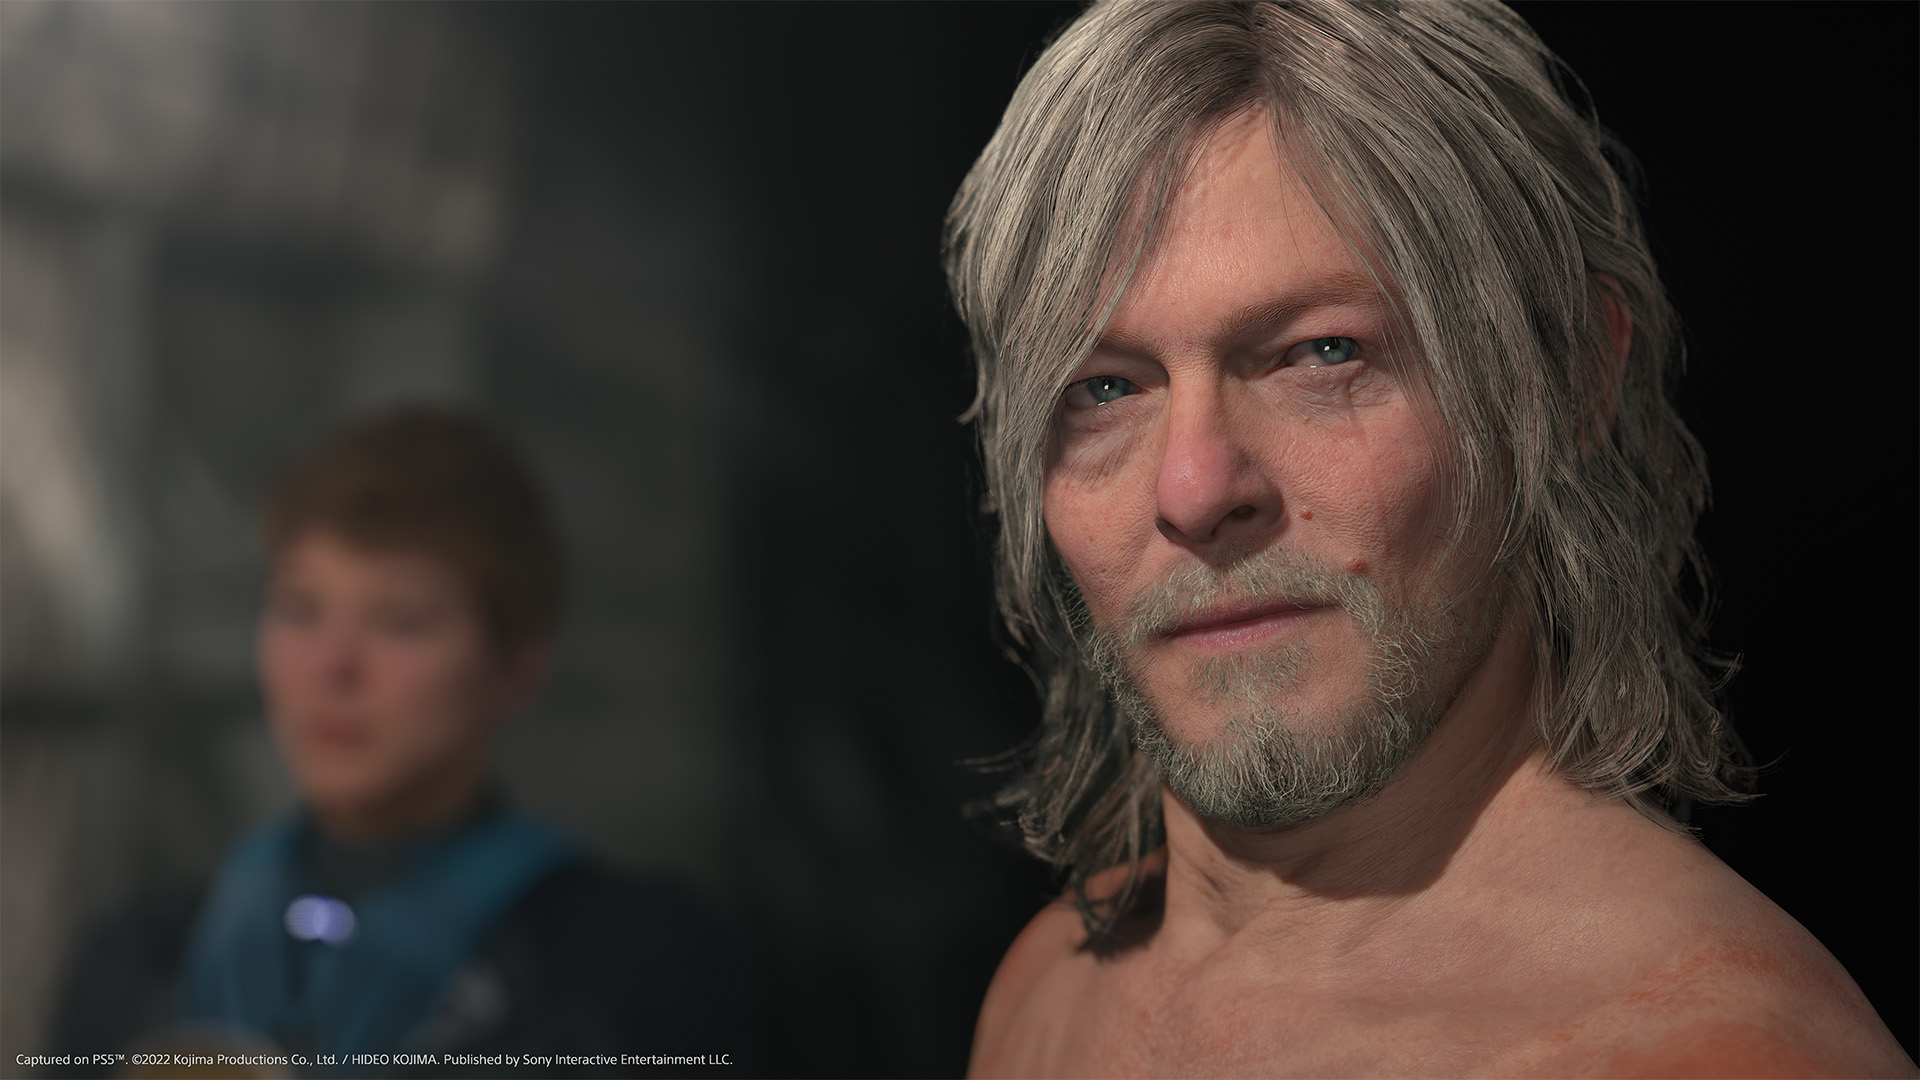 Death Stranding 2 is still going to be a PlayStation exclusive - Xfire